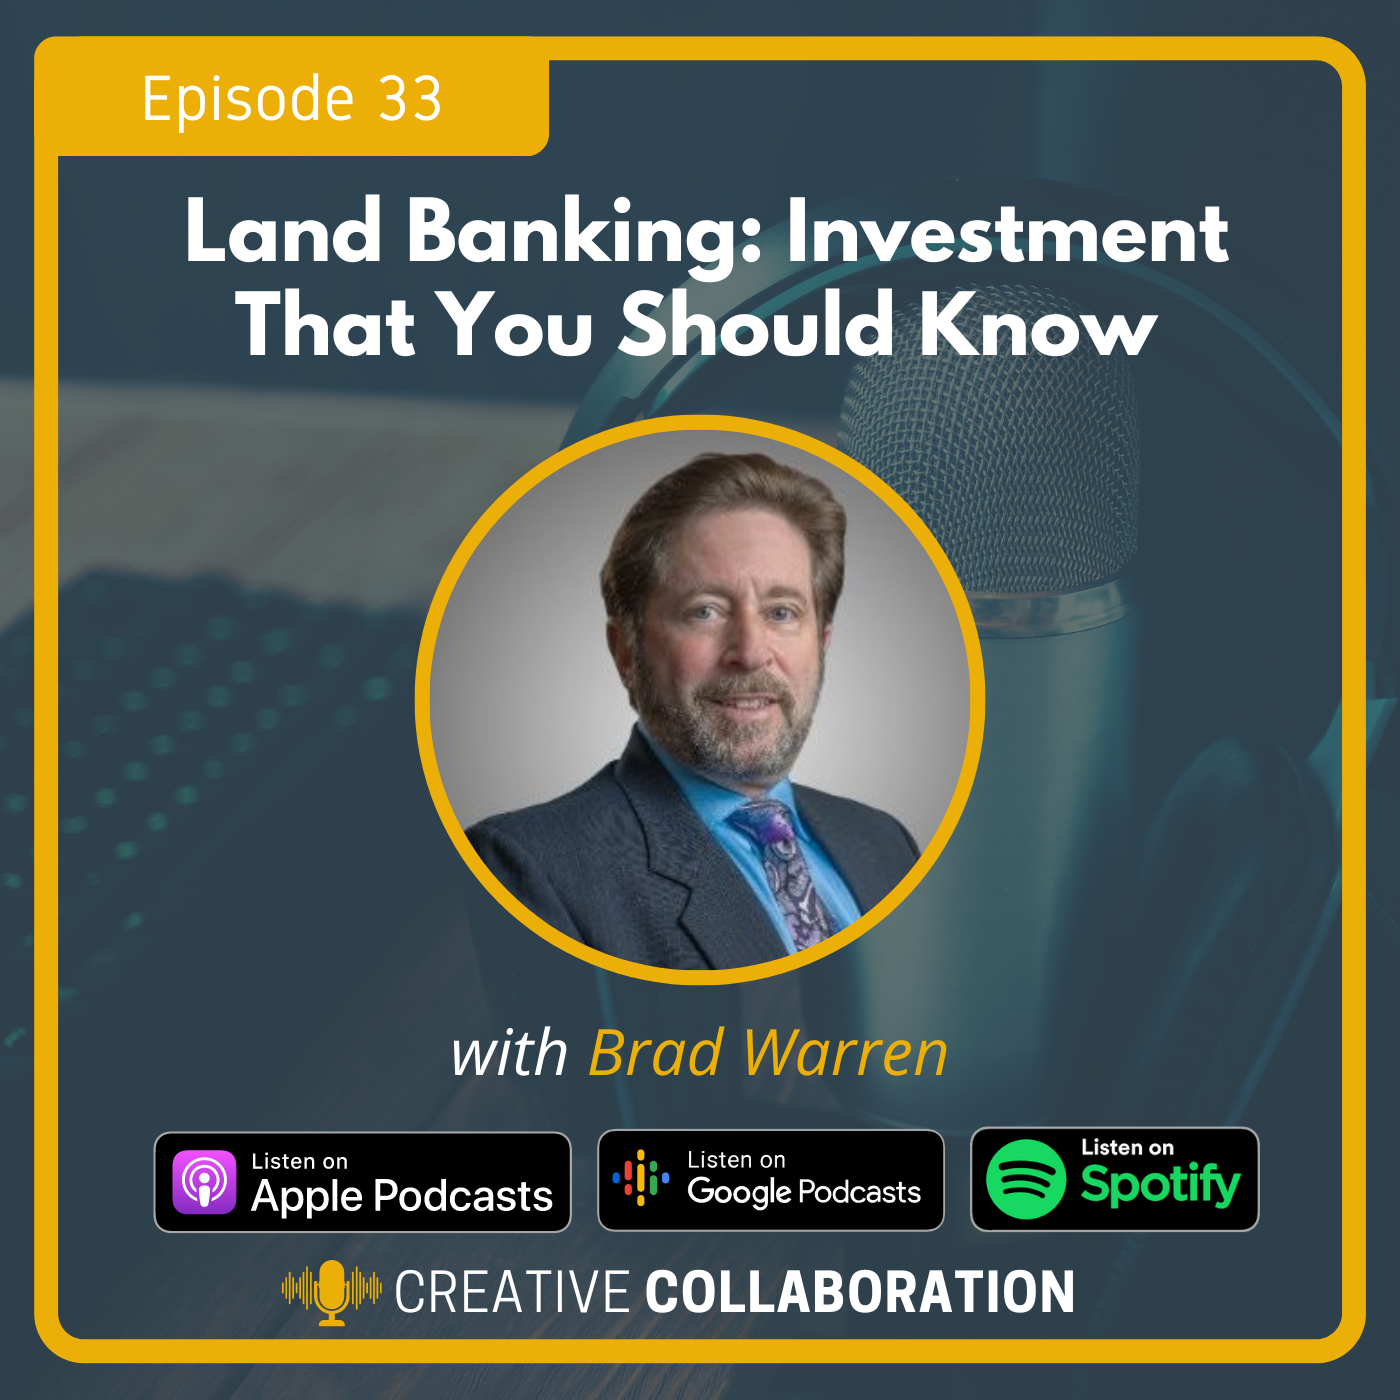 Land Banking: Investment That You Should Know with Brad Warren